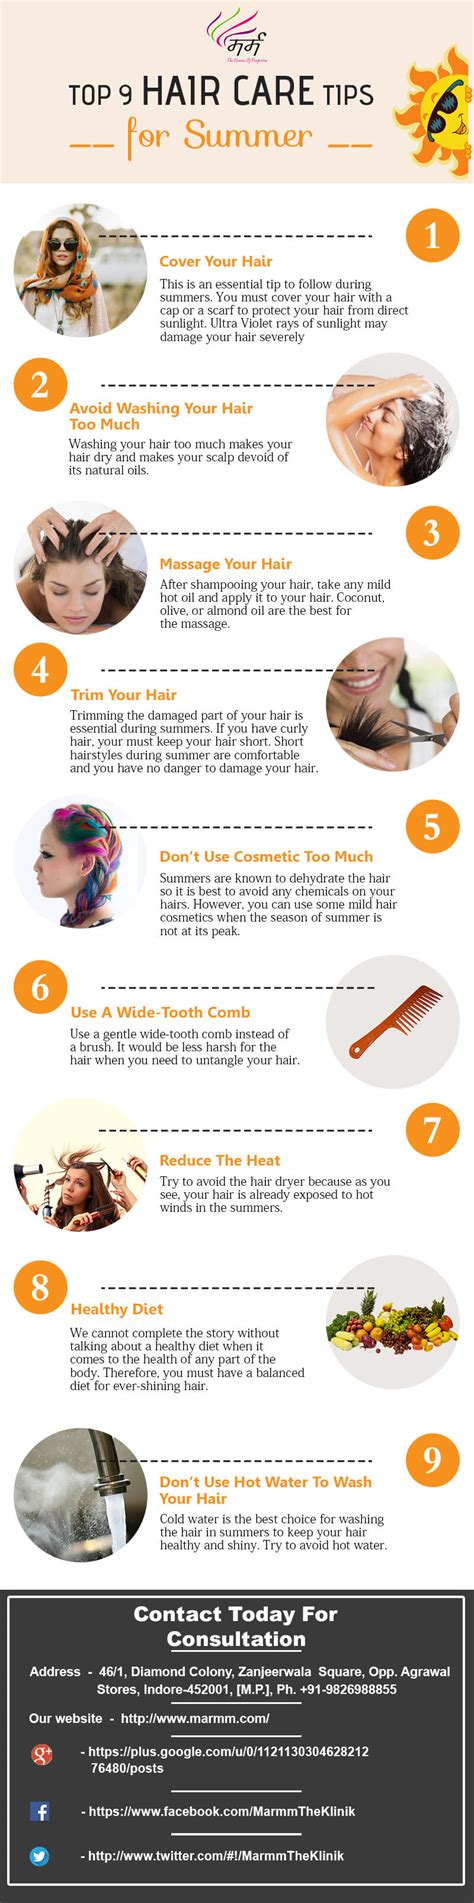 Top Hair Care Tips For Summer Infographic Plaza